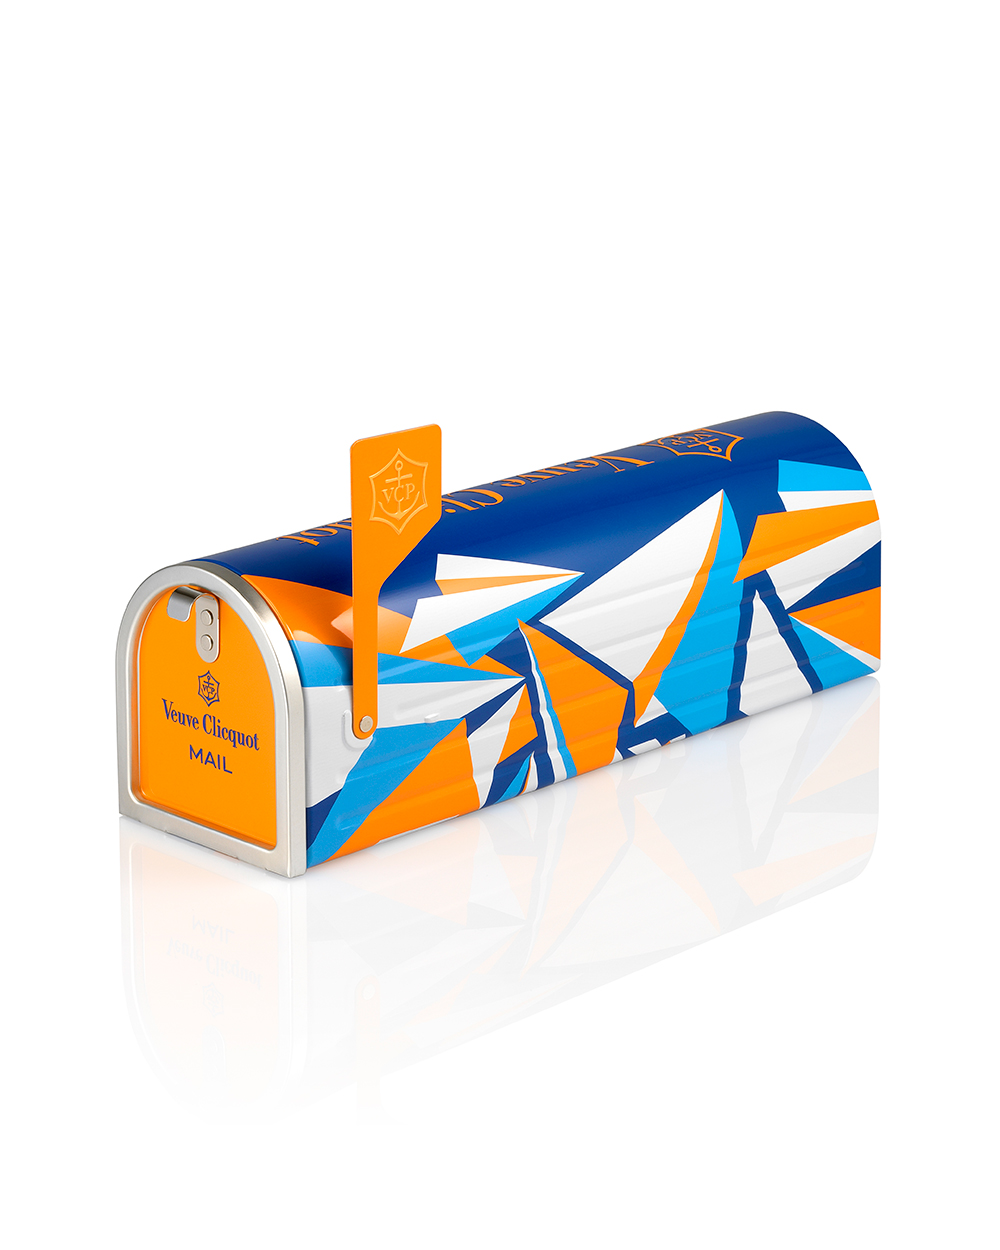 Veuve Clicquot limited edition Recreation Mailbox champagne, $76.99 exclusively from Glengarry